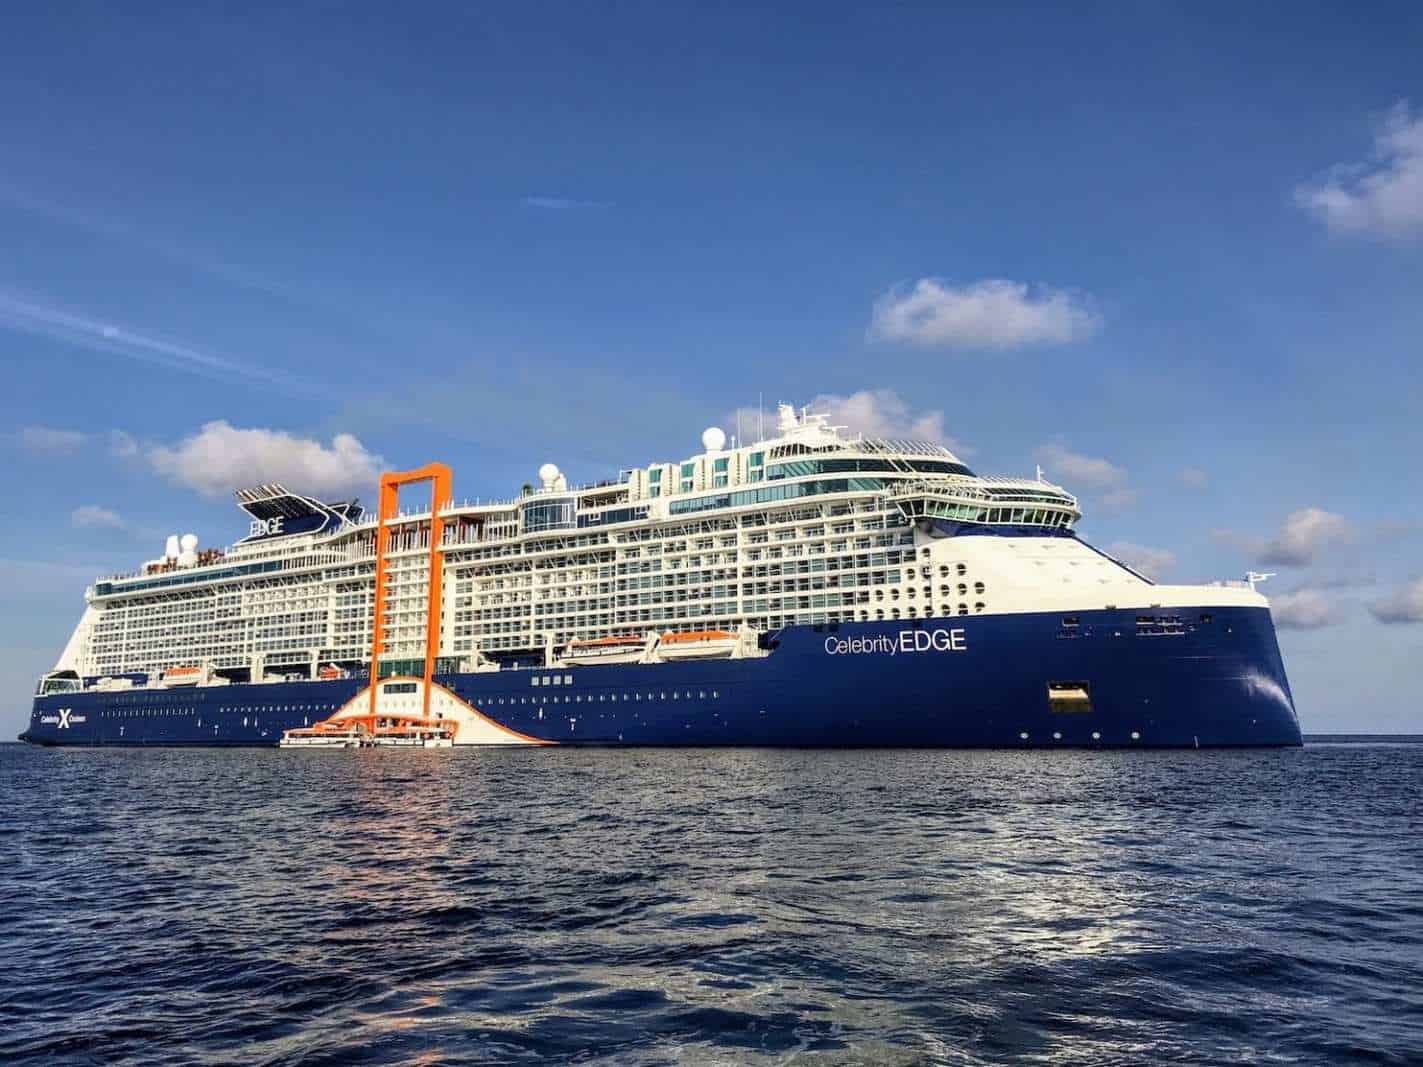 Celebrity Edge Review Highlights in Photos